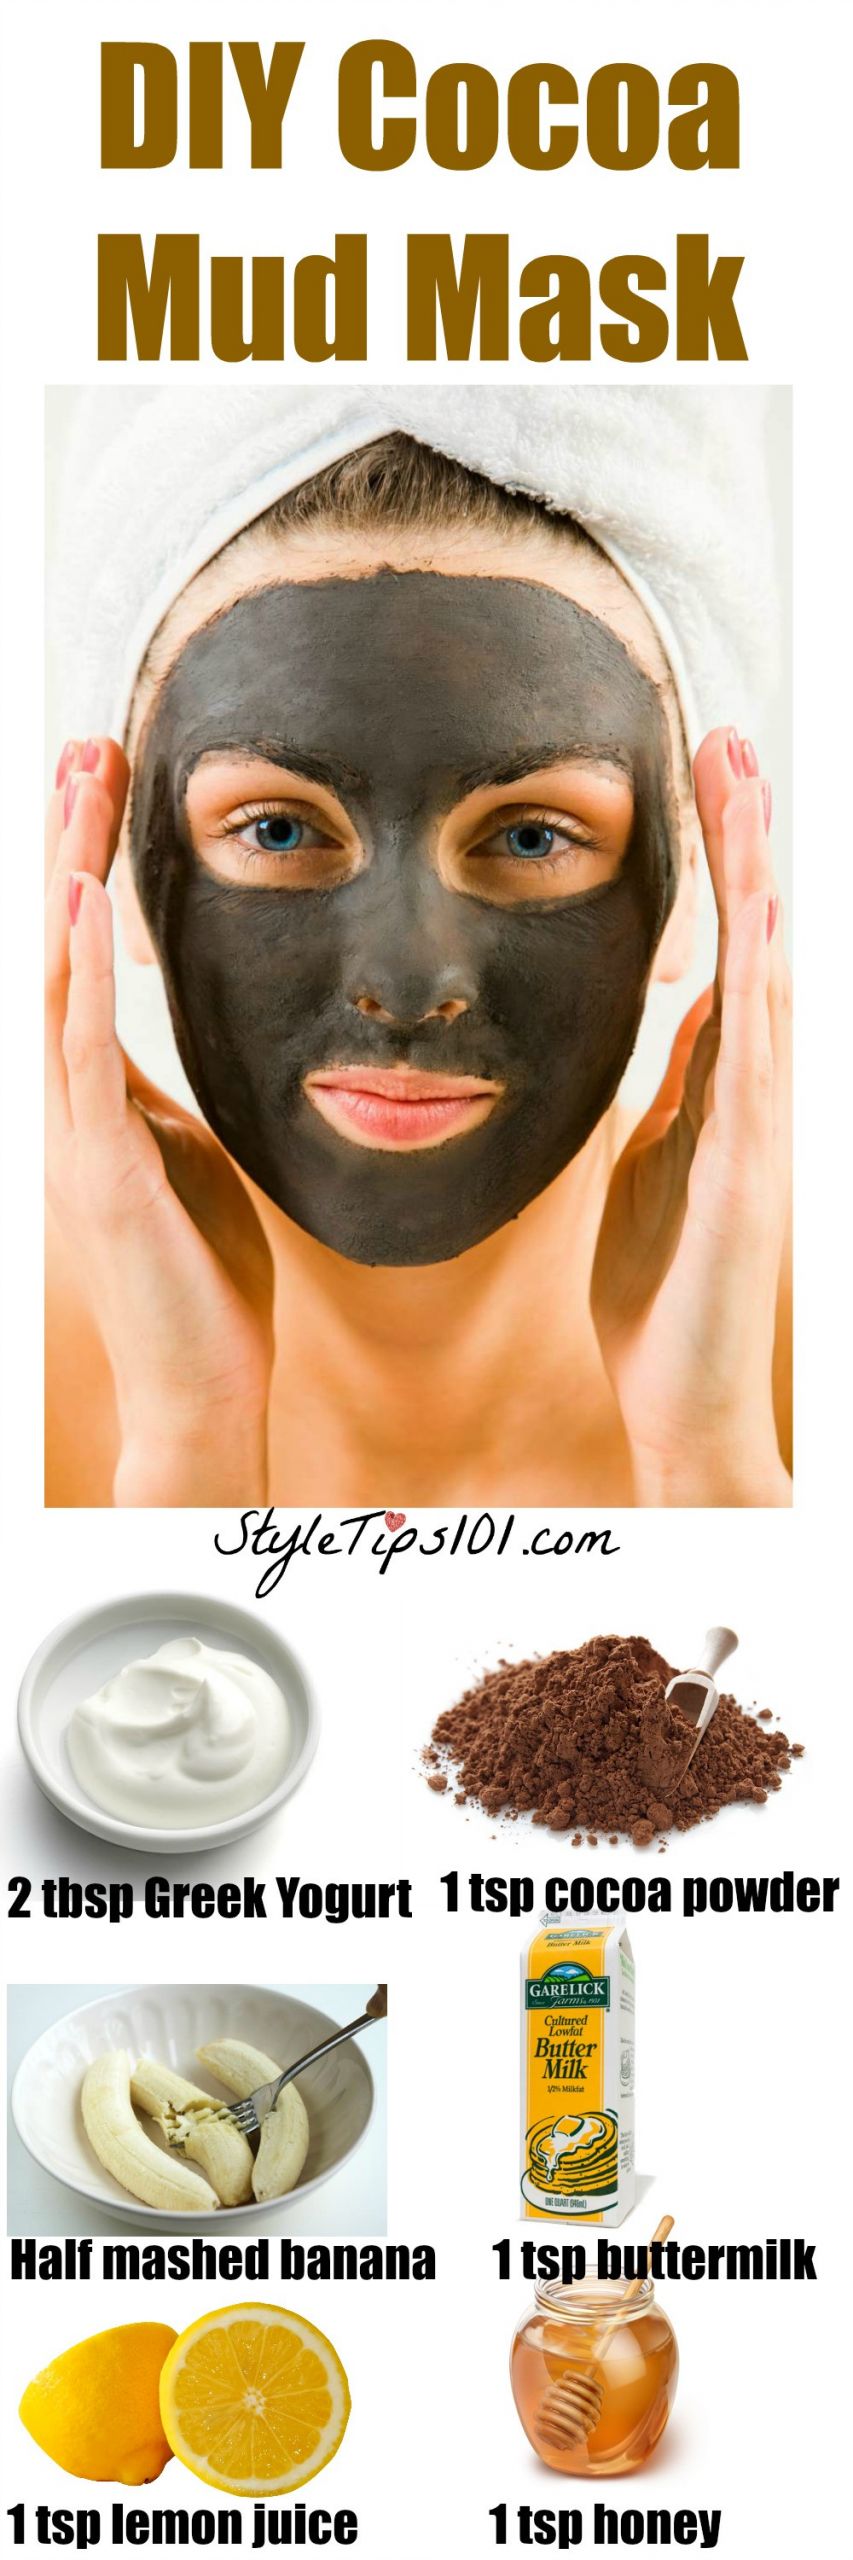 DIY Face Mask For Oily Skin And Acne
 DIY Mud Mask For Acne Prone and Oily Skin